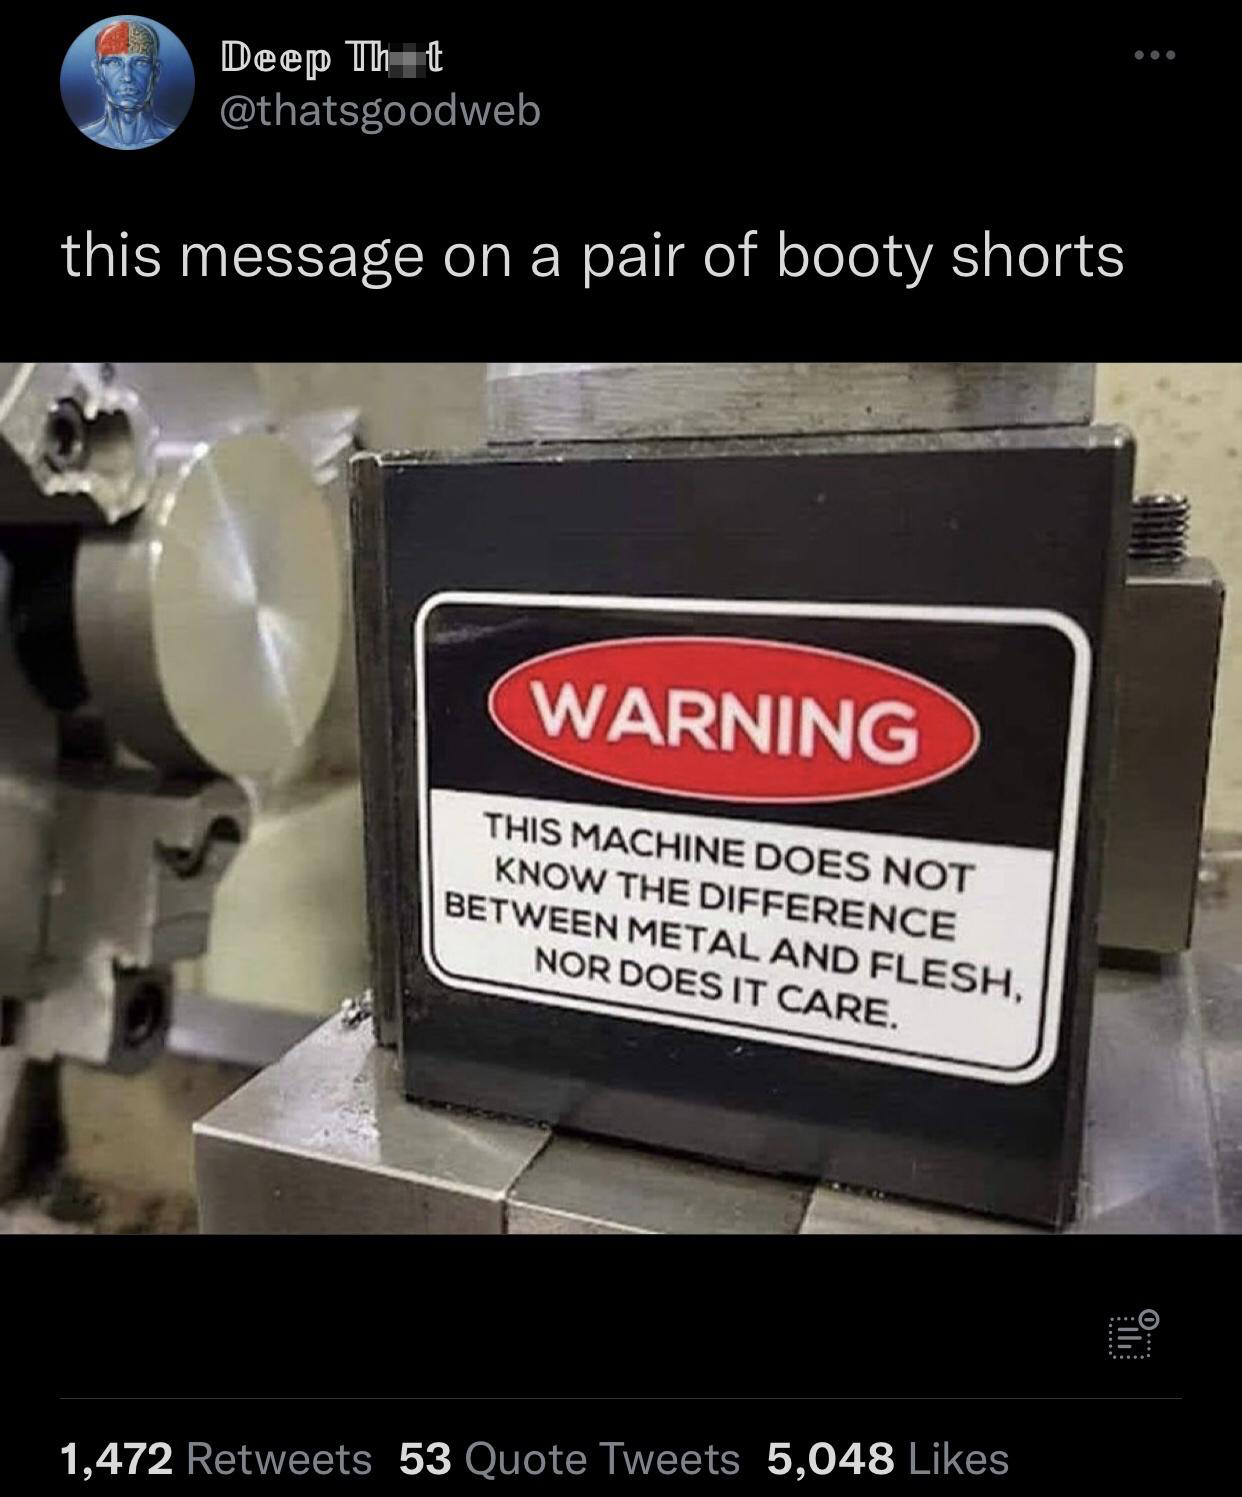 funny tweets - warning this machine does not know the difference between metal and flesh - Deep Tht this message on a pair of booty shorts Warning This Machine Does Not Know The Difference Between Metal And Flesh, Nor Does It Care. 1,472 53 Quote Tweets 5